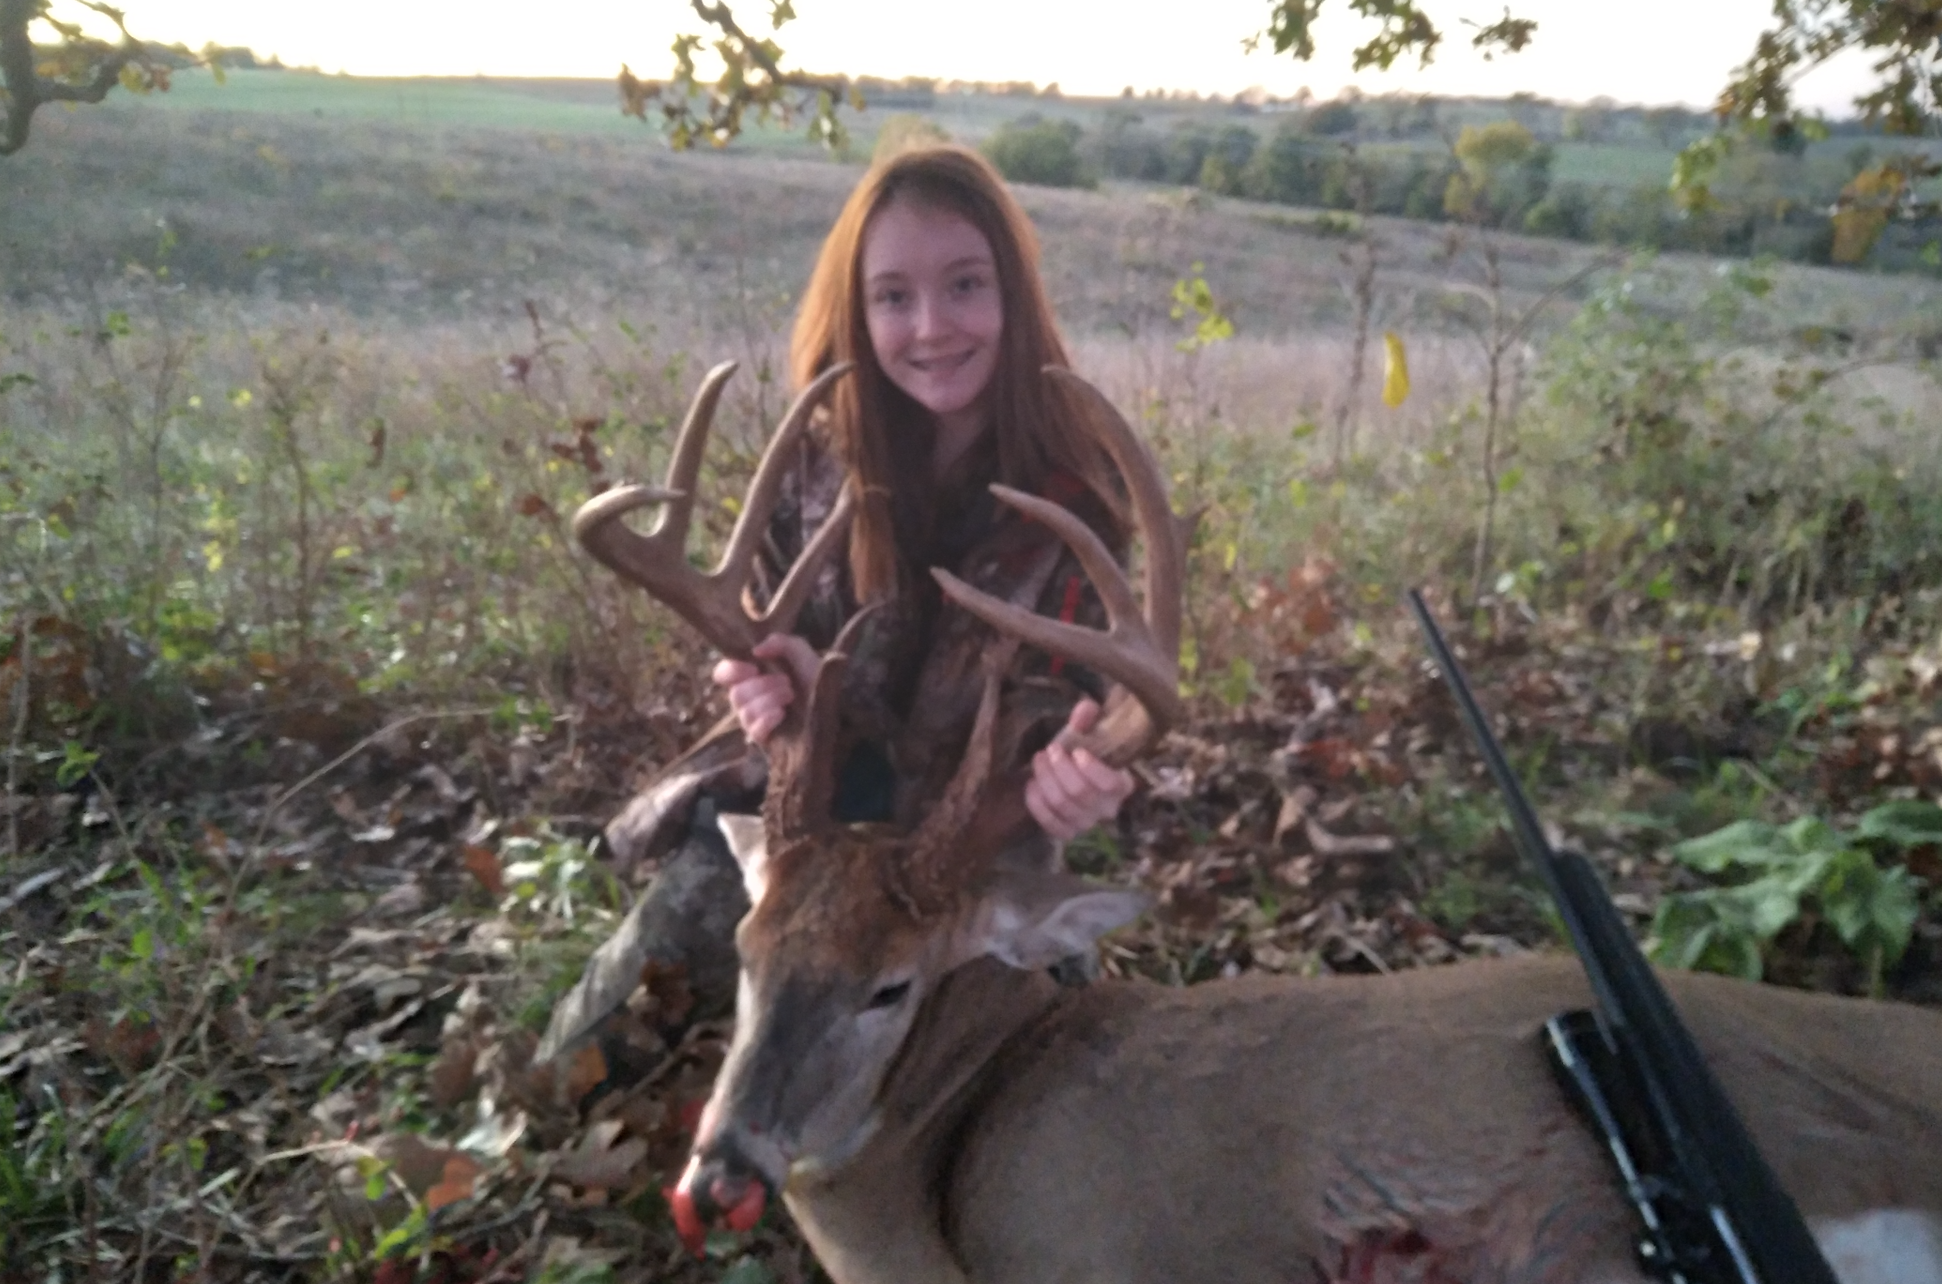 The oldest Gulick daughter shot the 15-point buck that evening